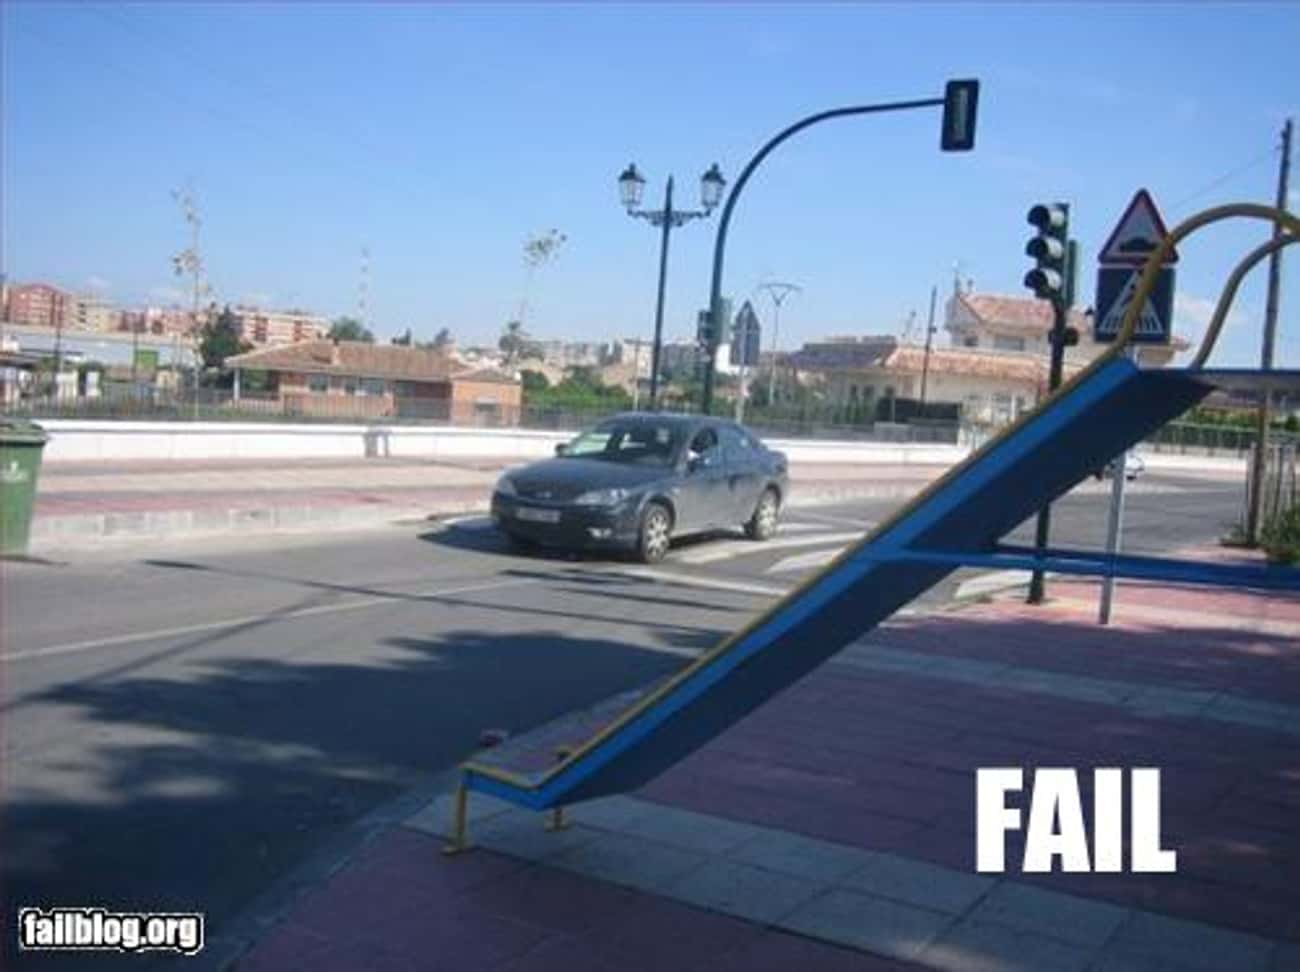 Low fail. Wins fails picture. Funny fail Video. Failure pictures from Videos.